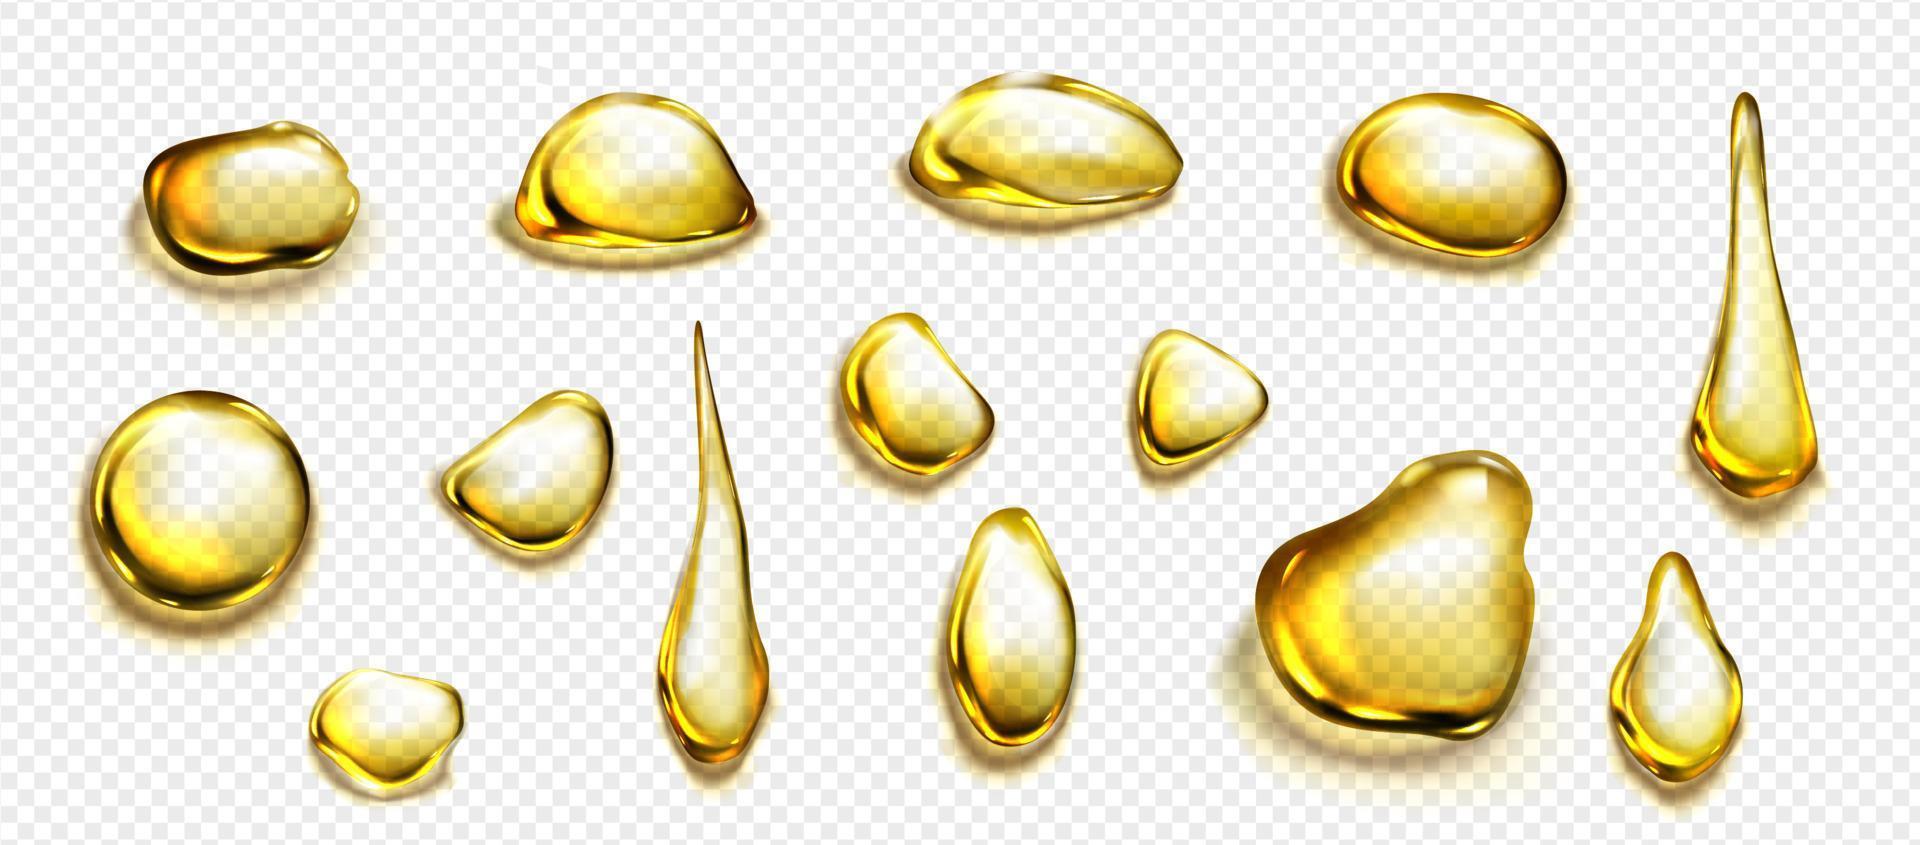 Golden drops and puddles of oil or liquid honey vector